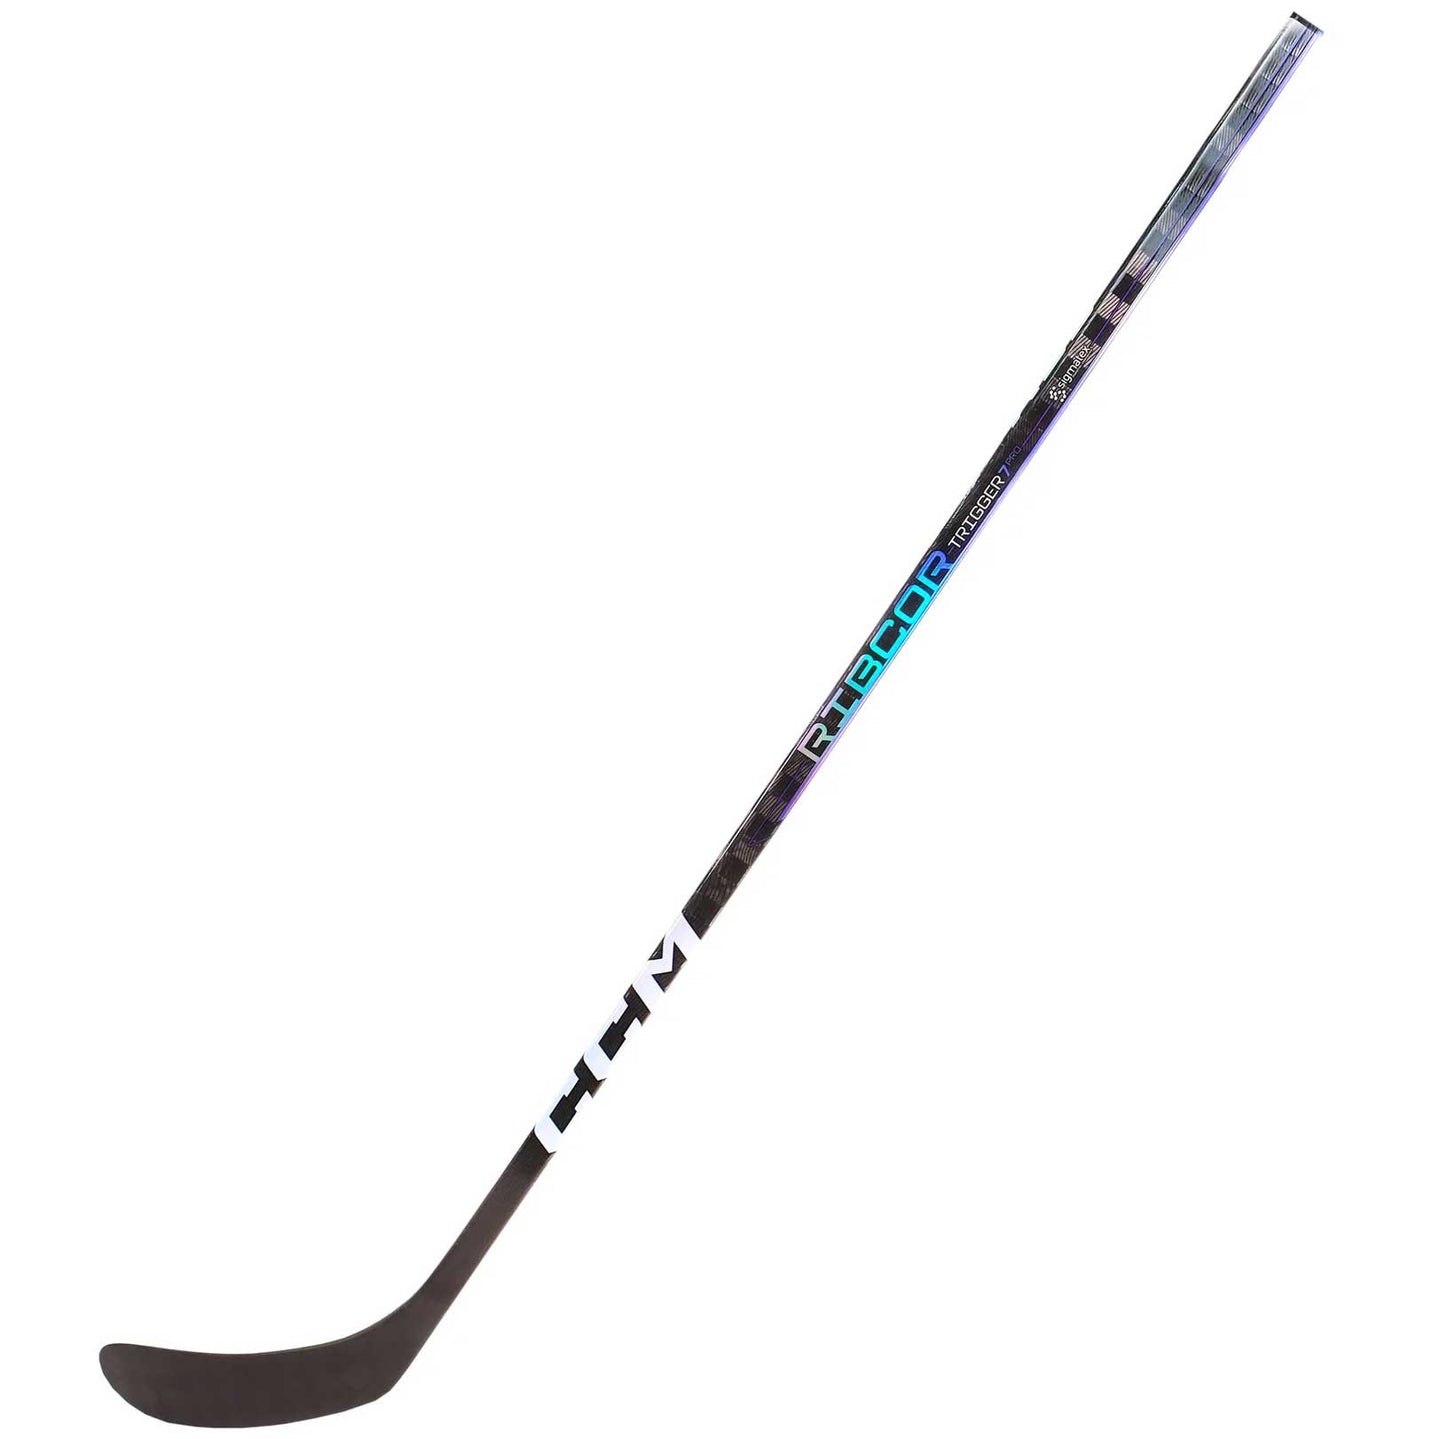 Full view picture of the CCM RIBCOR Trigger 7 PRO Grip Ice Hockey Stick (Senior)